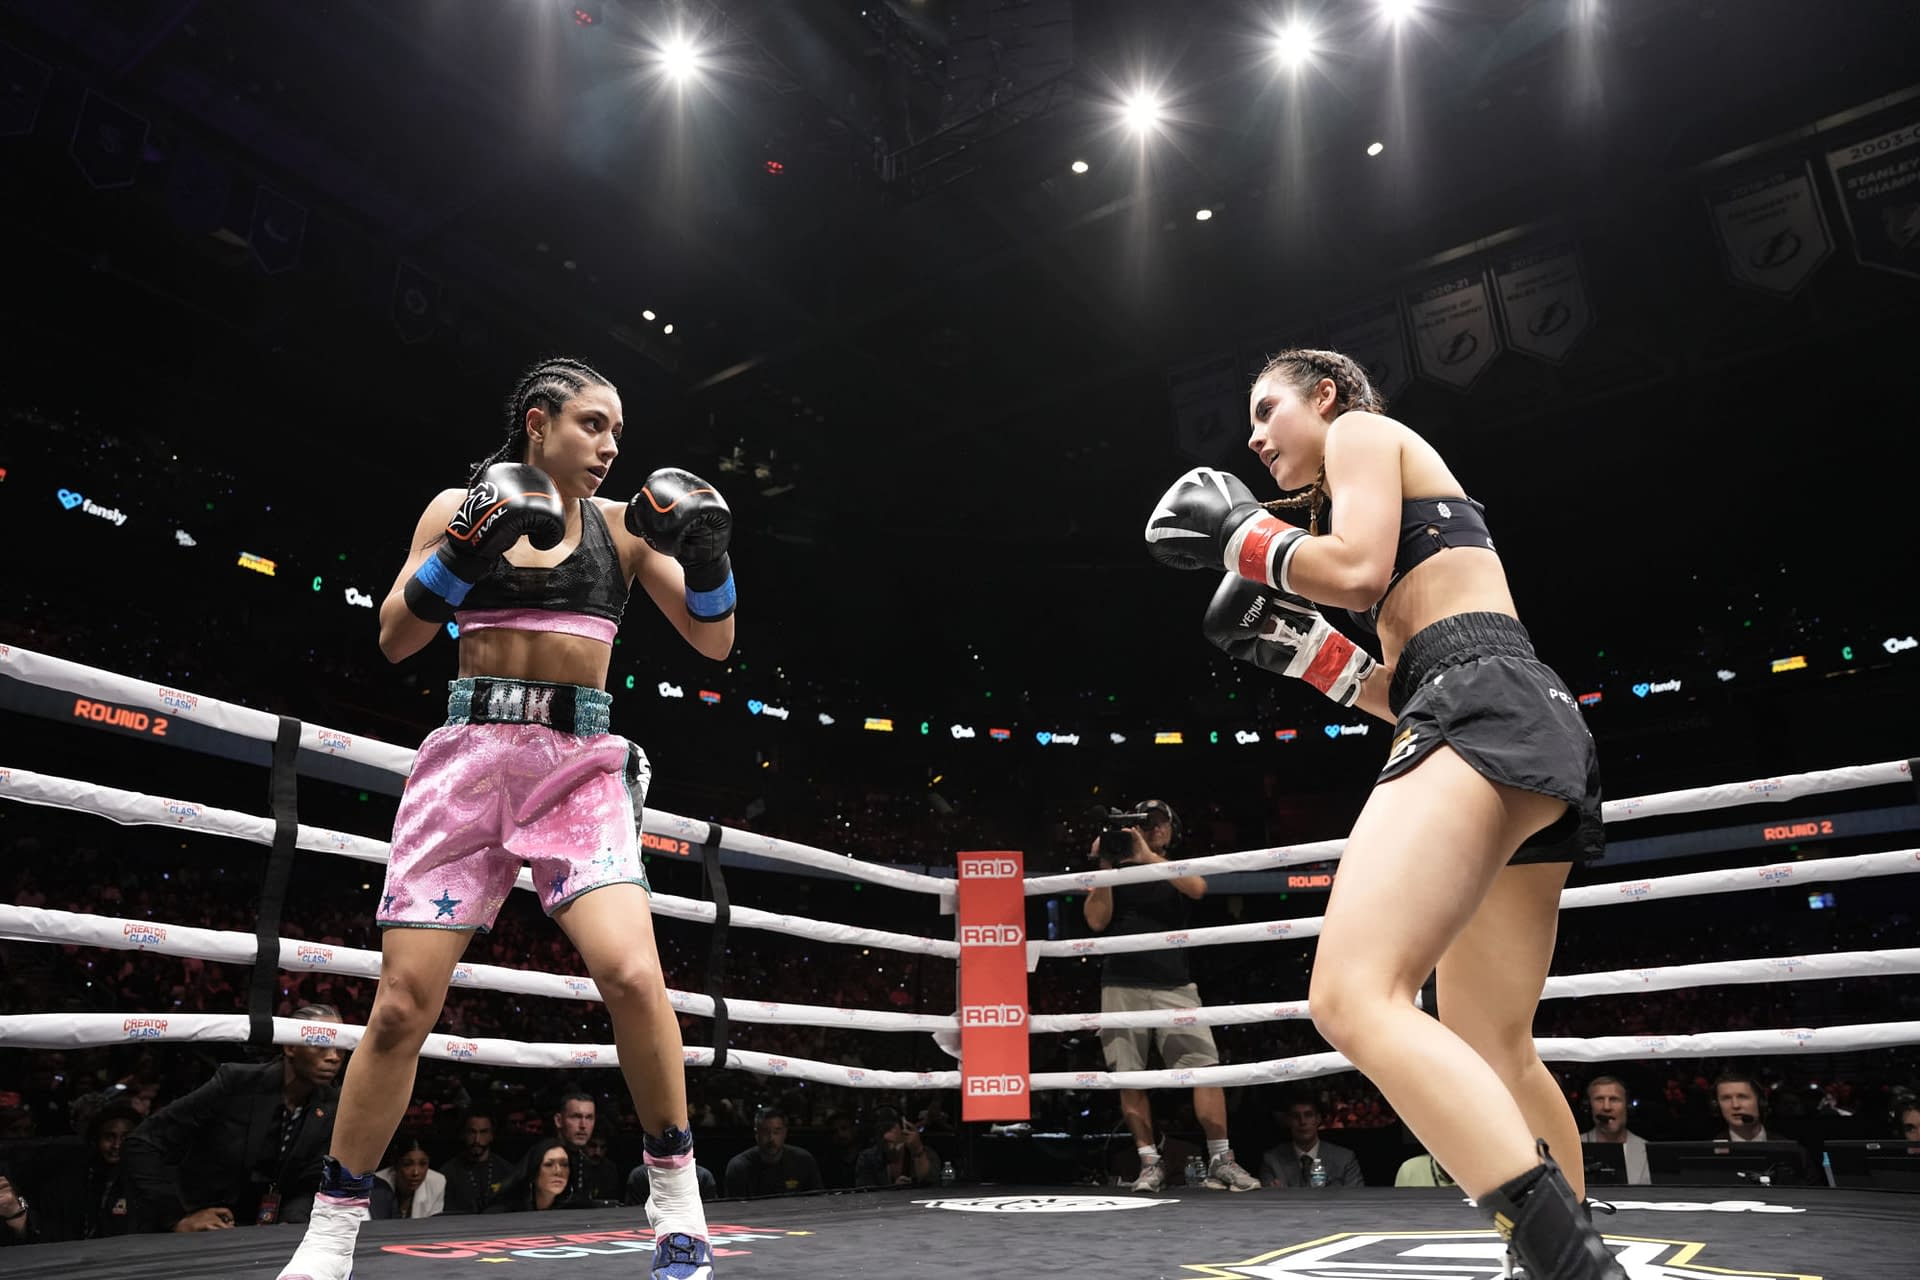 Creator Clash 2 Adds Andrea Botez vs. Michelle Khare for April 15 Card -  Big Fight Weekend